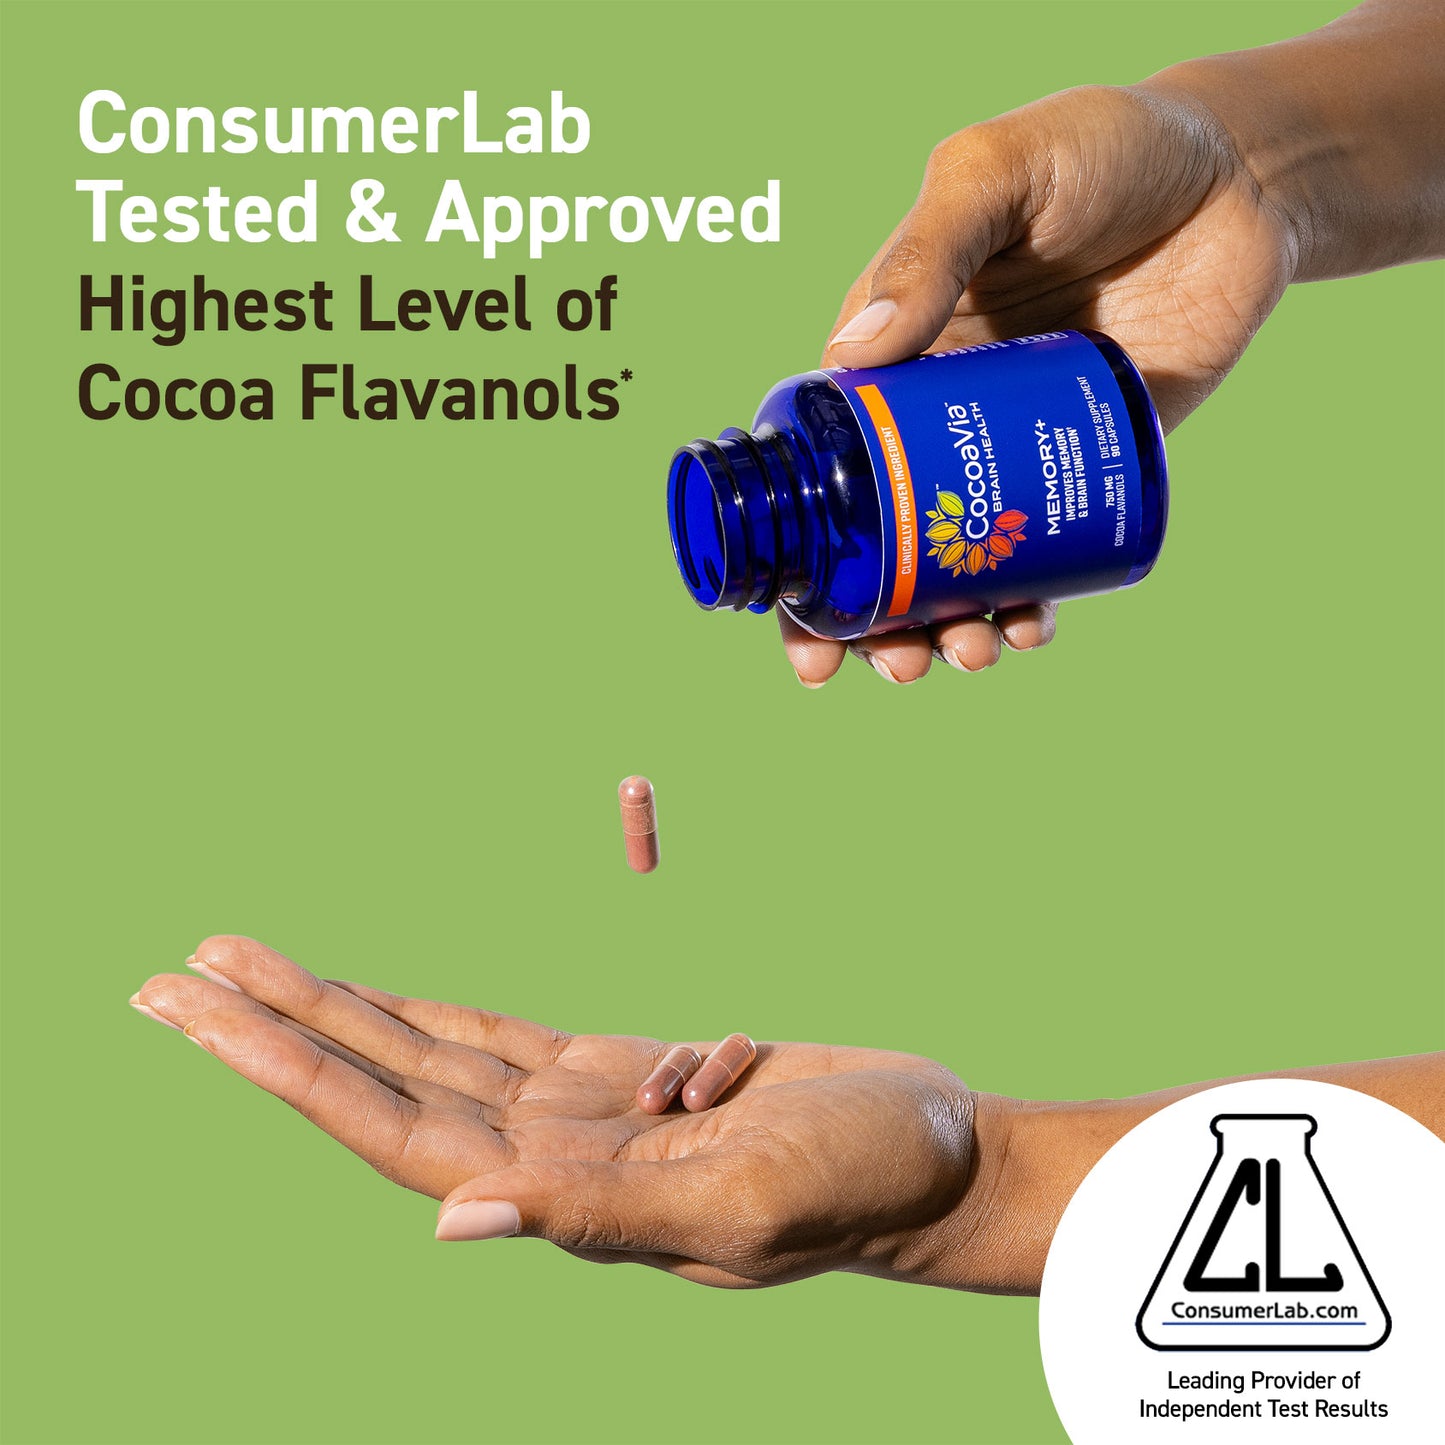 Top pick. rated for cocoa flavanols. Consumerlab approved